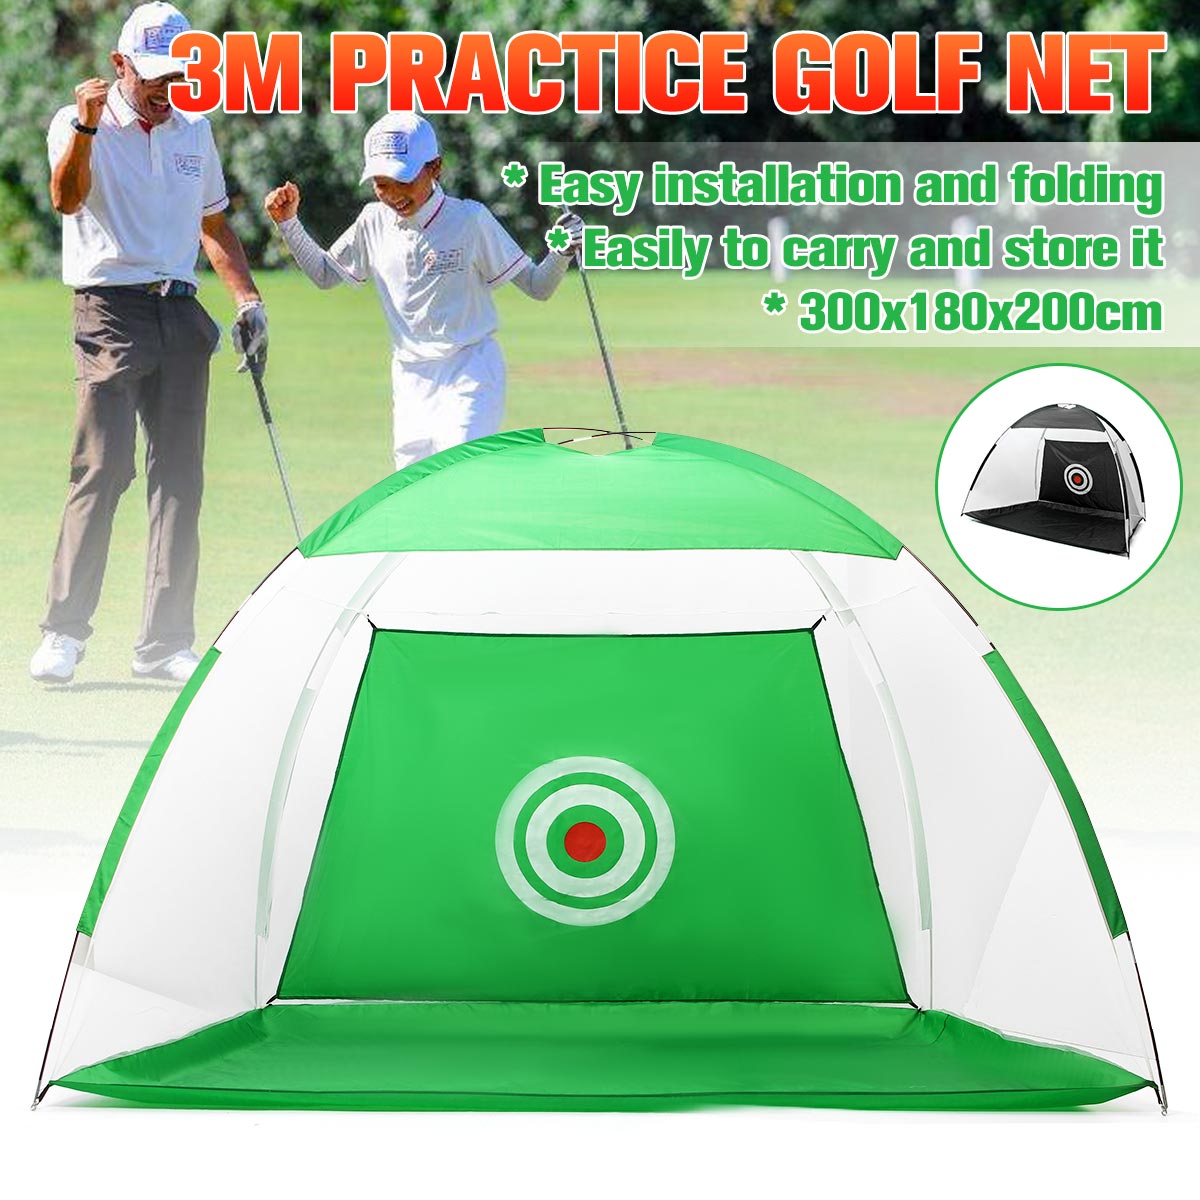 3M-Golf-Training-Net-Portable-Foldable-Practice-Golf-Chipping-Net-Hitting-Cage-Trainer-Indoor-Outdoo-1709126-1